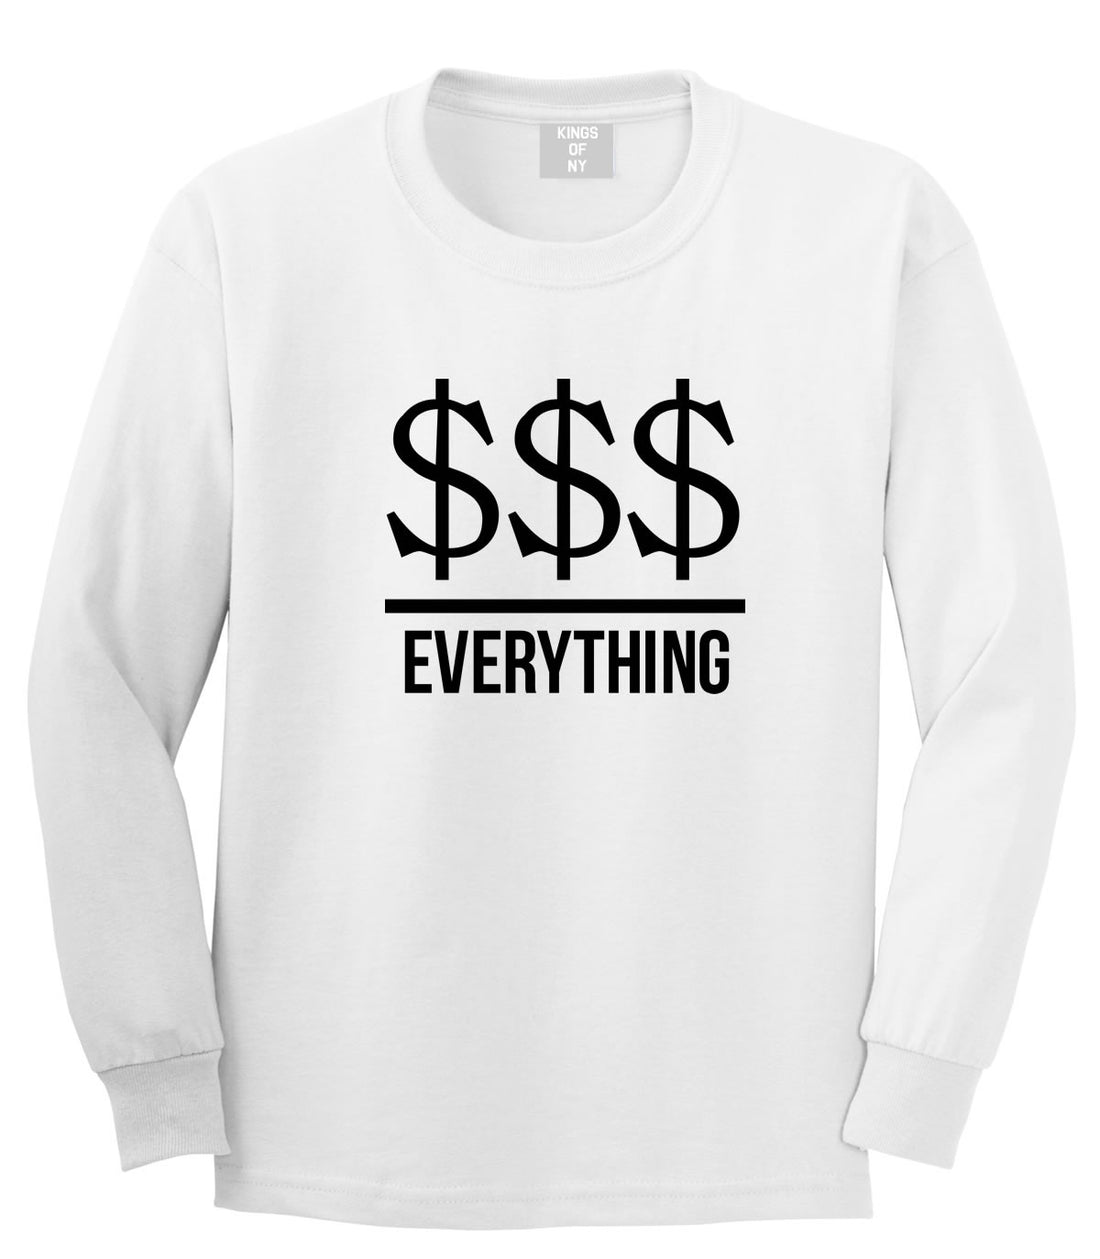 Kings Of NY Money Over Everything Long Sleeve T-Shirt in White